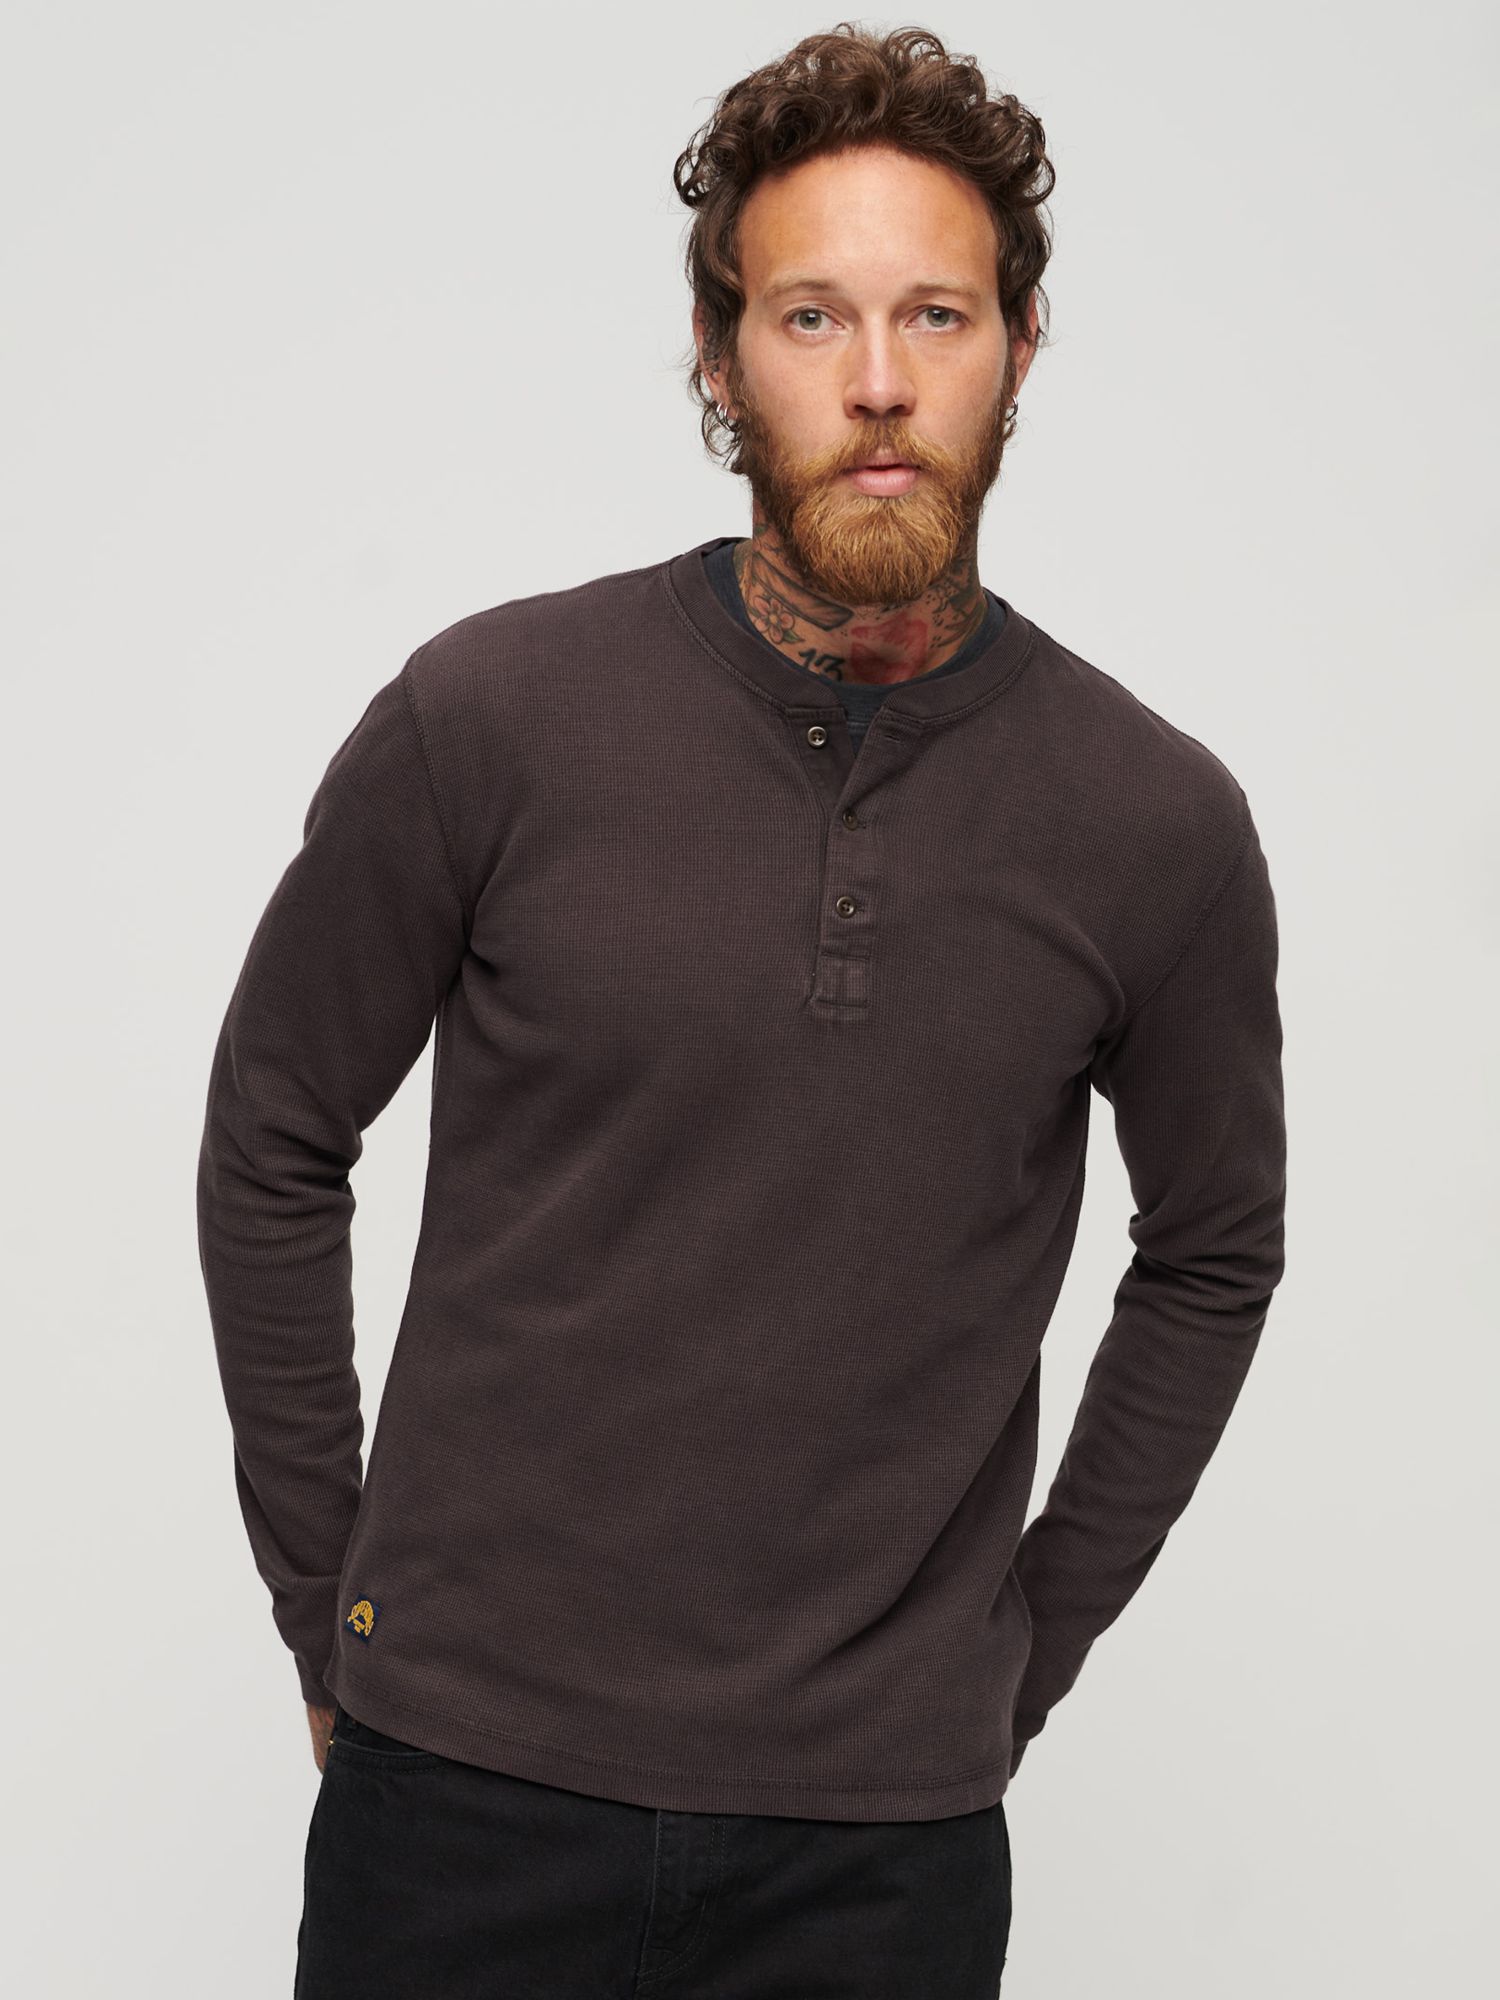 Superdry Organic Cotton Long Sleeve Waffle Henley Top, Surplus Goods Olive  at John Lewis & Partners